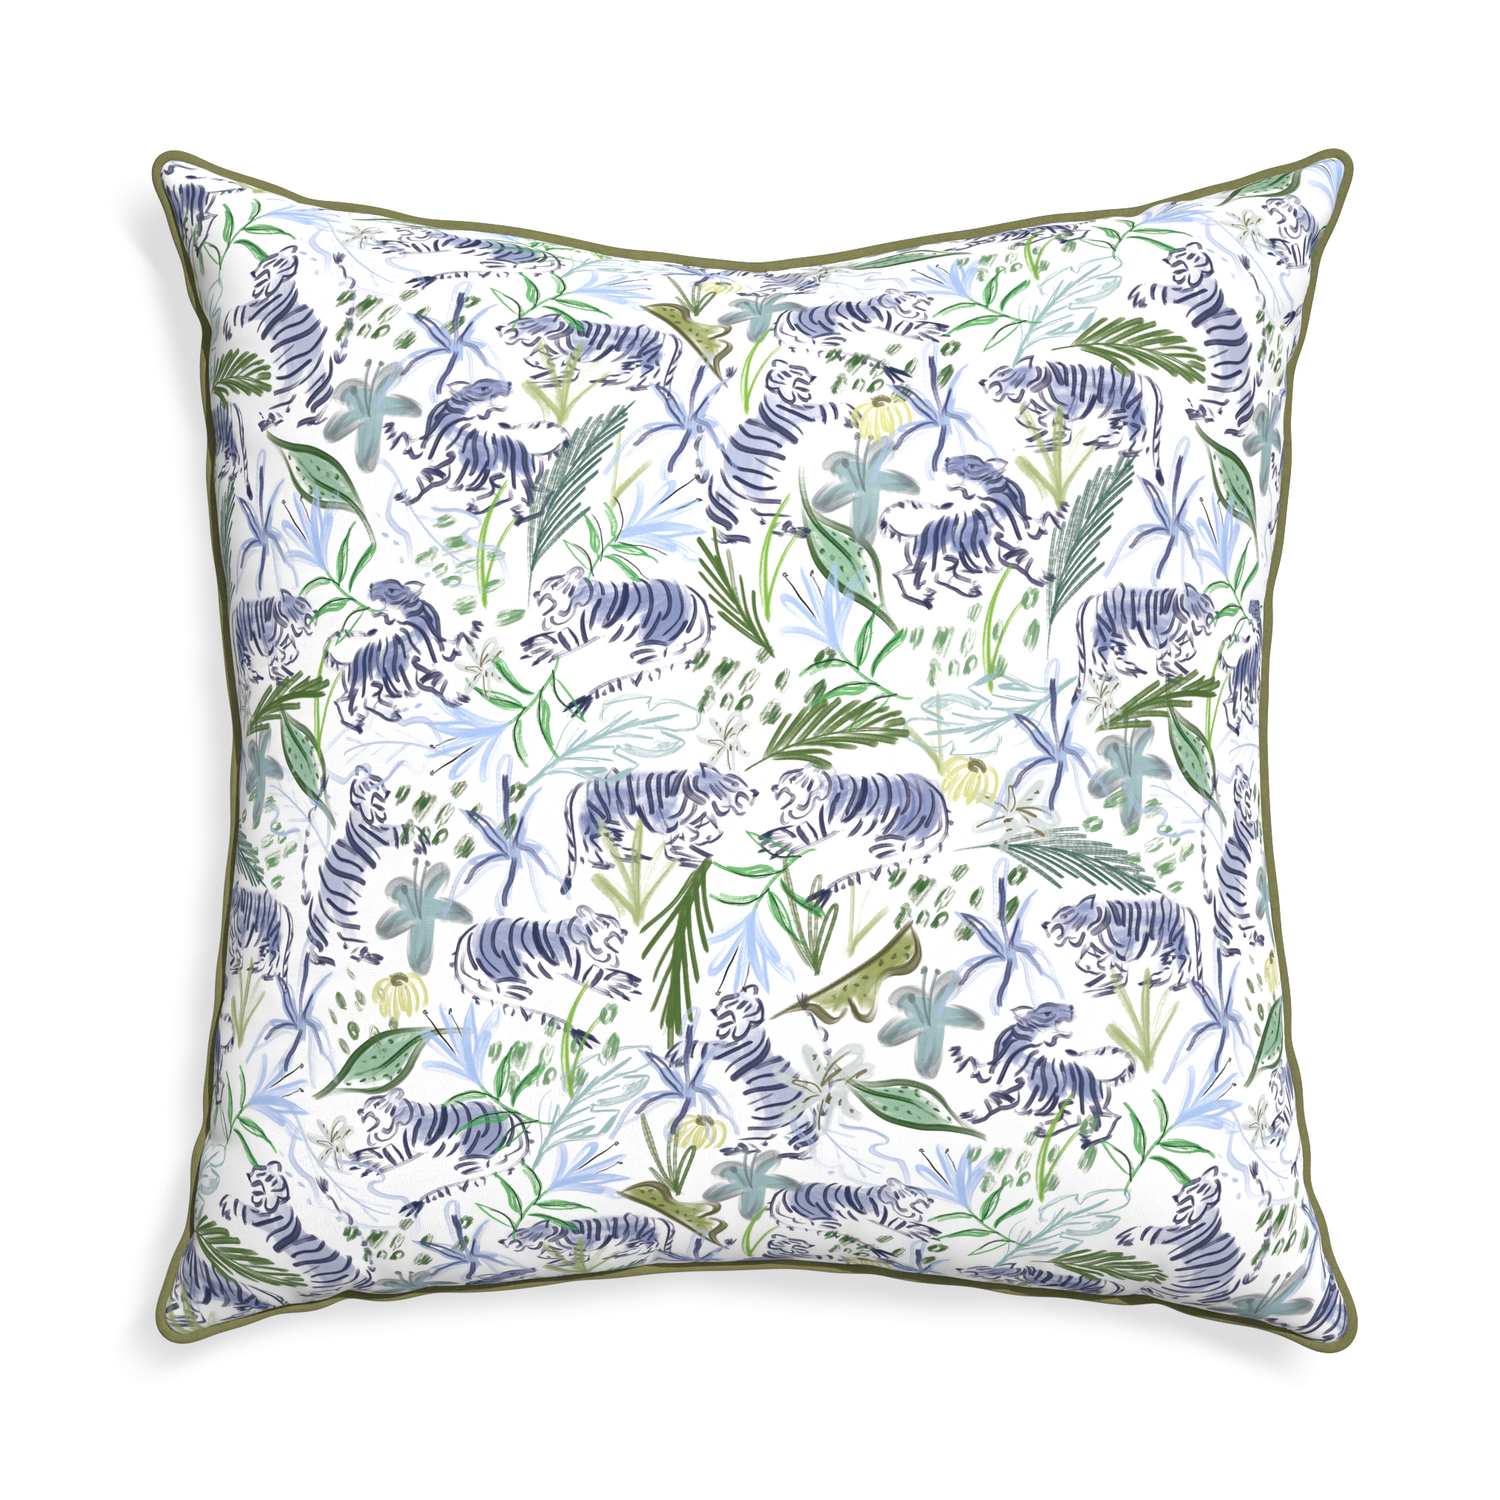 Euro-sham frida green custom pillow with moss piping on white background